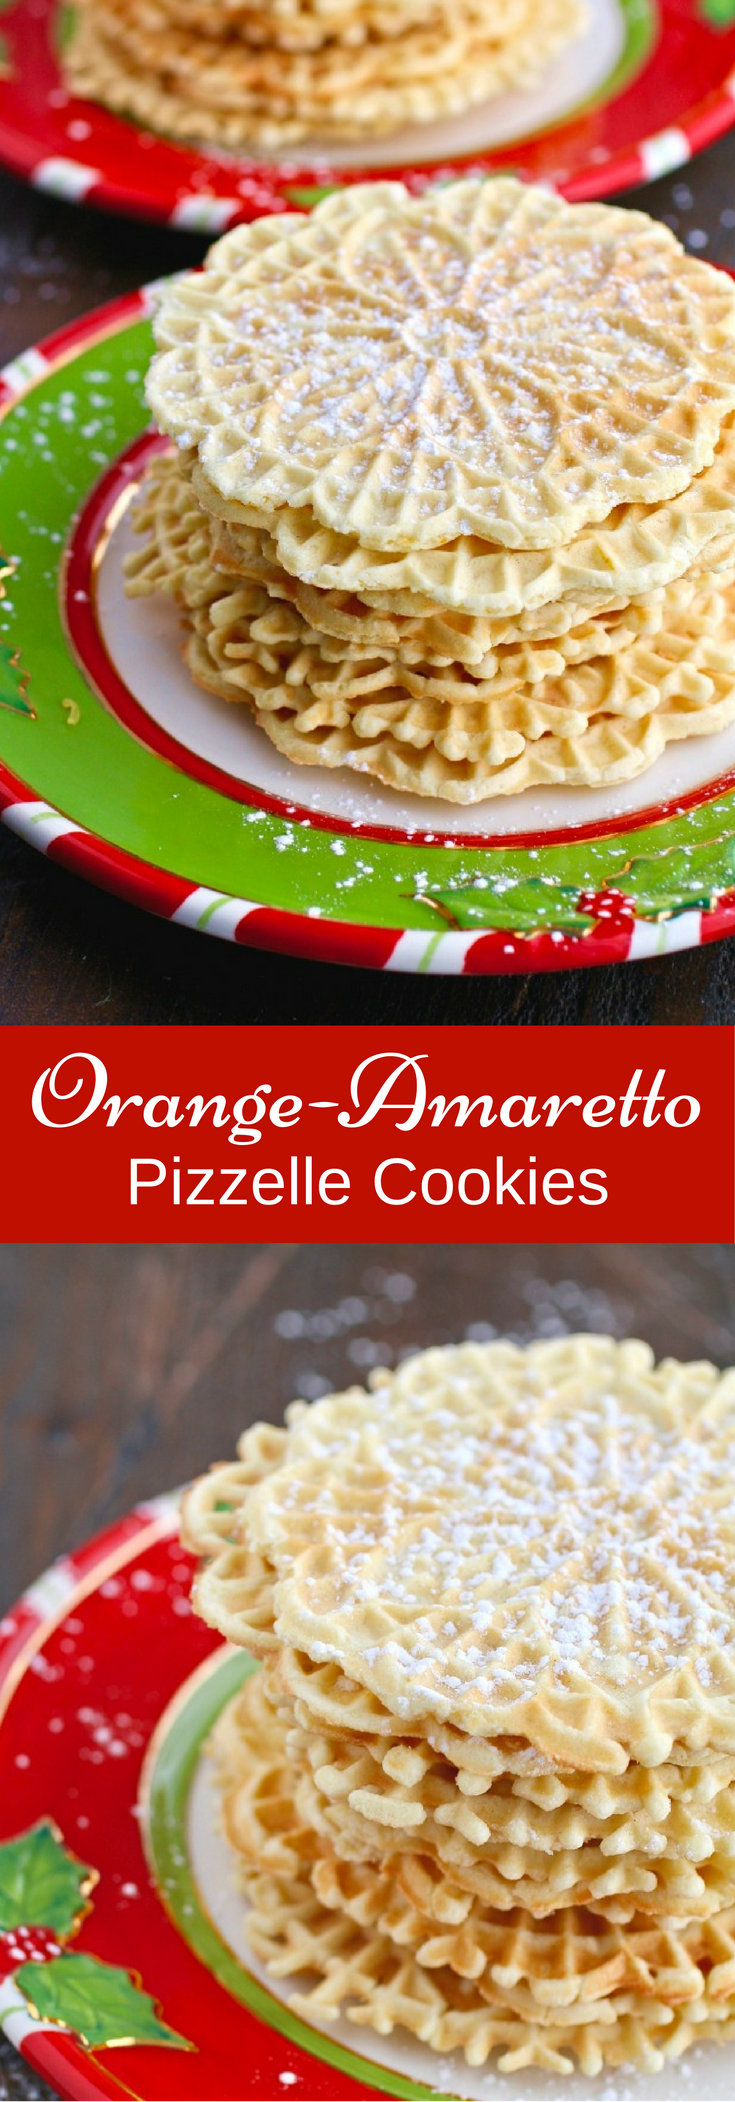 Nothing beats tradition! Orange-Amaretto Pizzelle Cookies are a wonderful holiday treat!